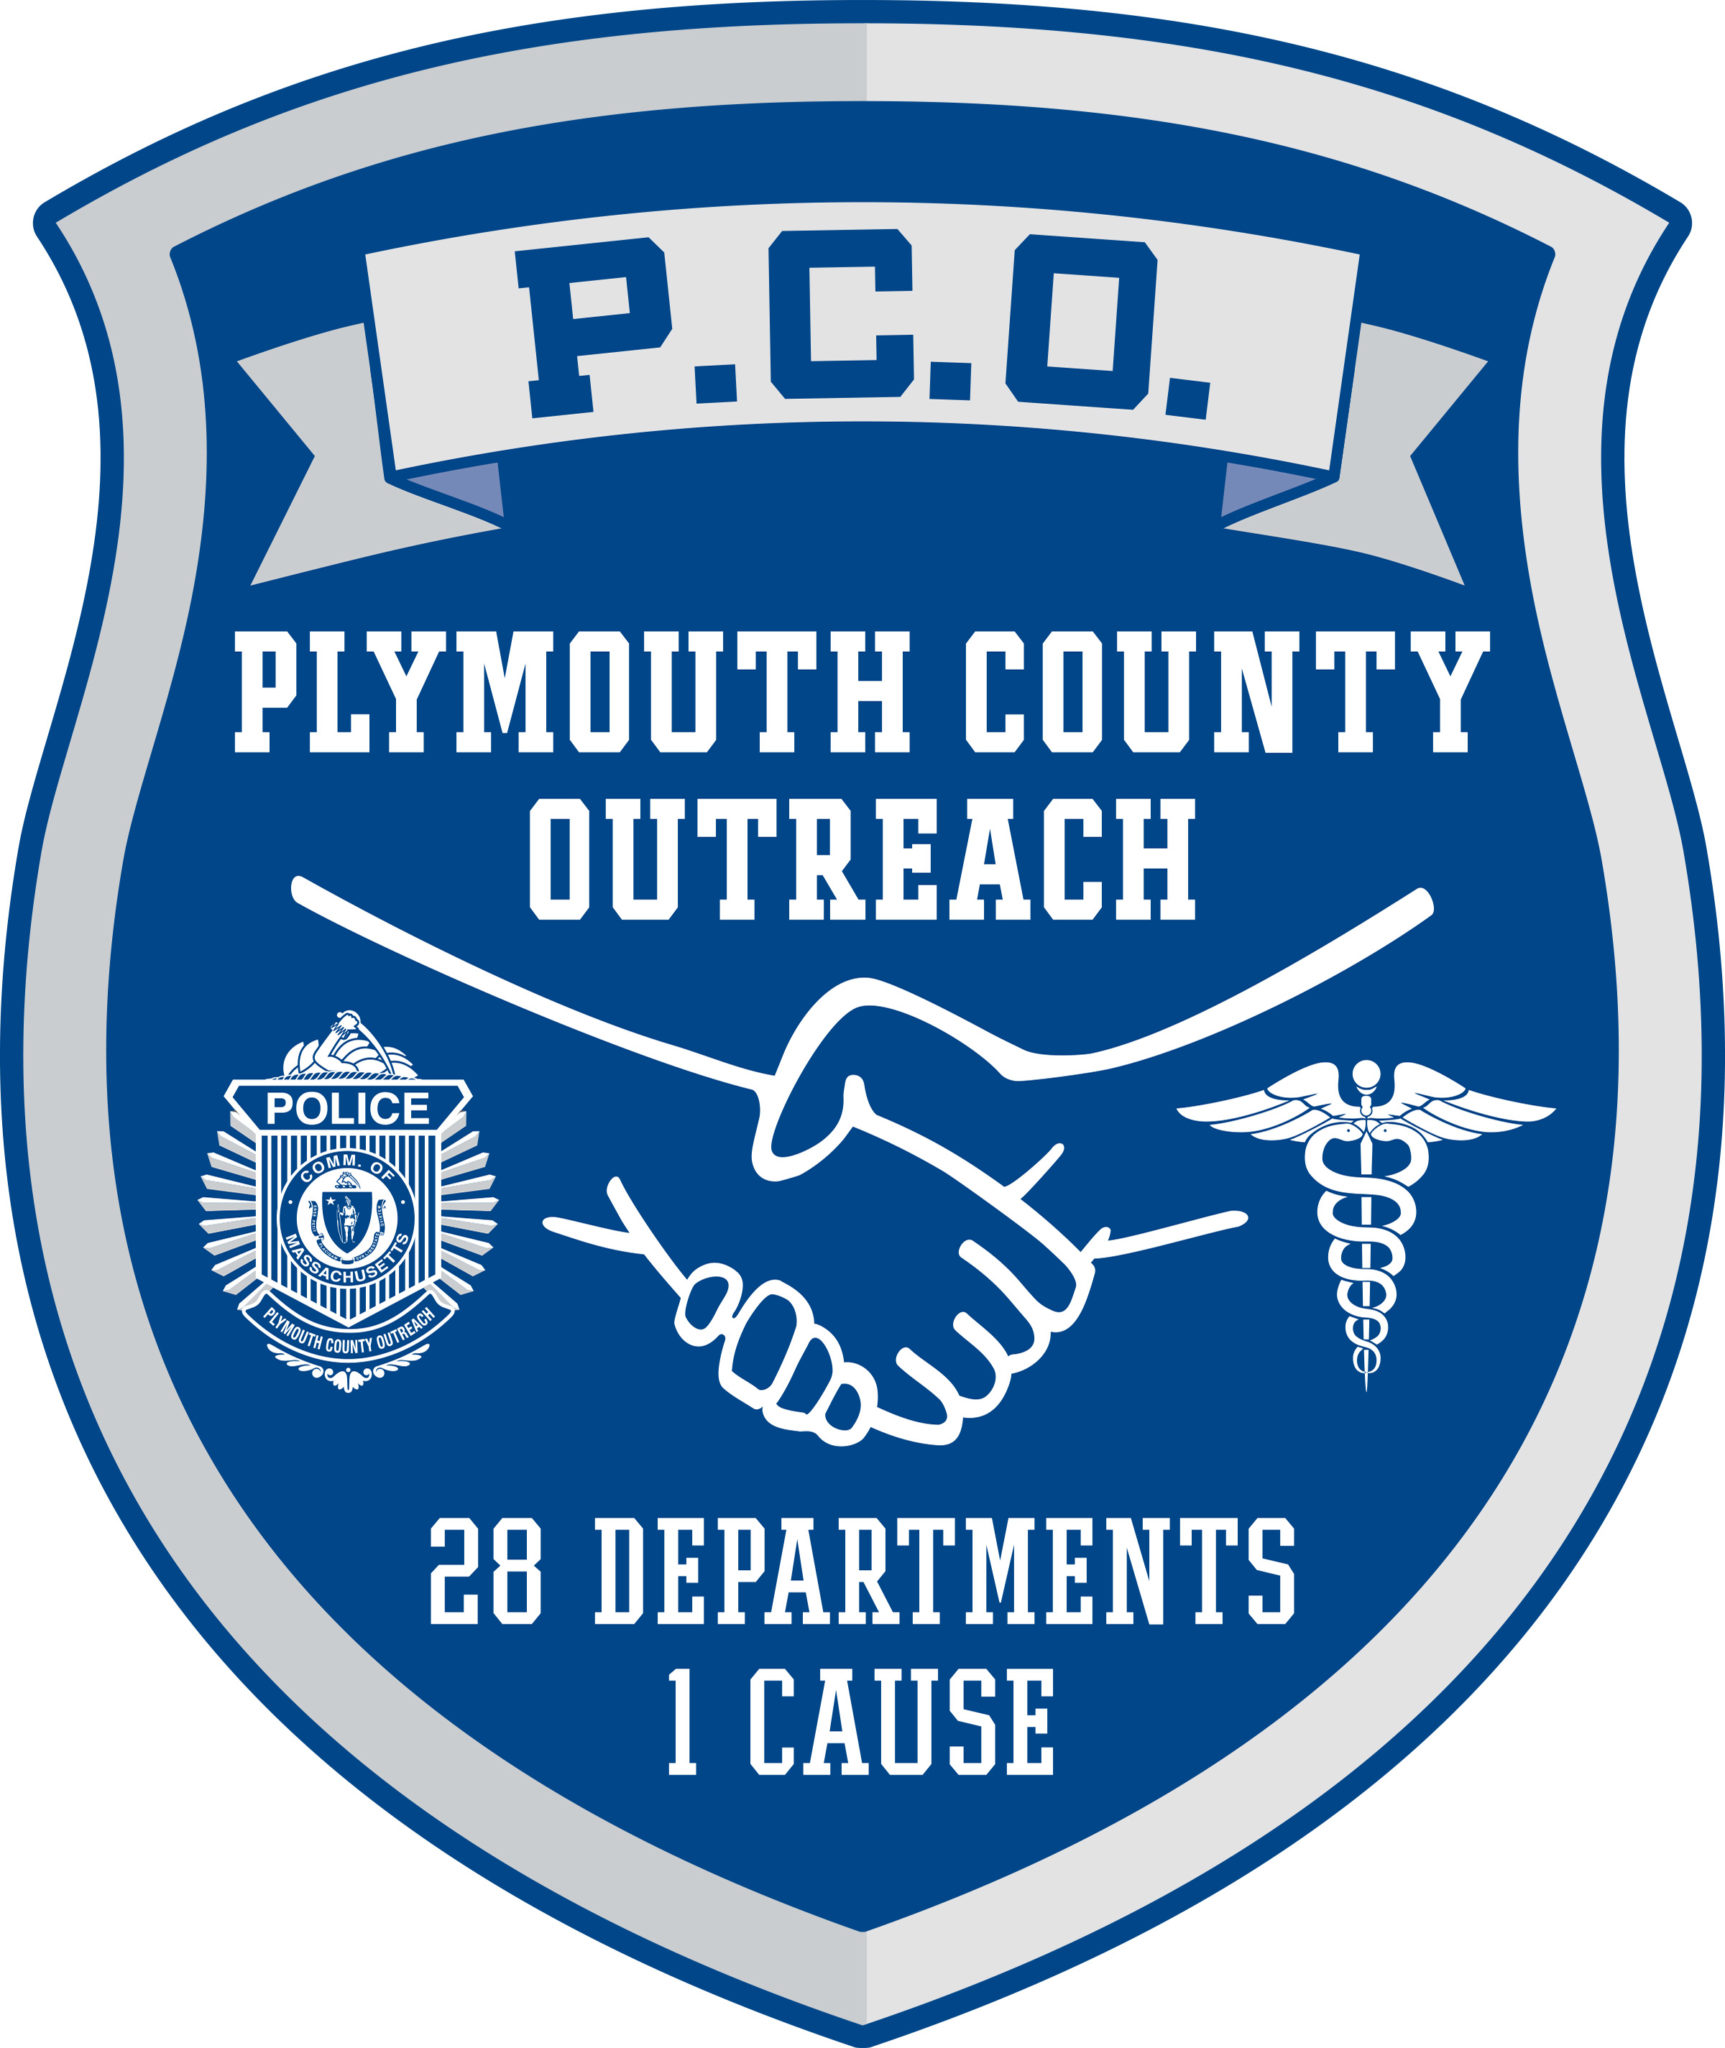 Plymouth County Outreach